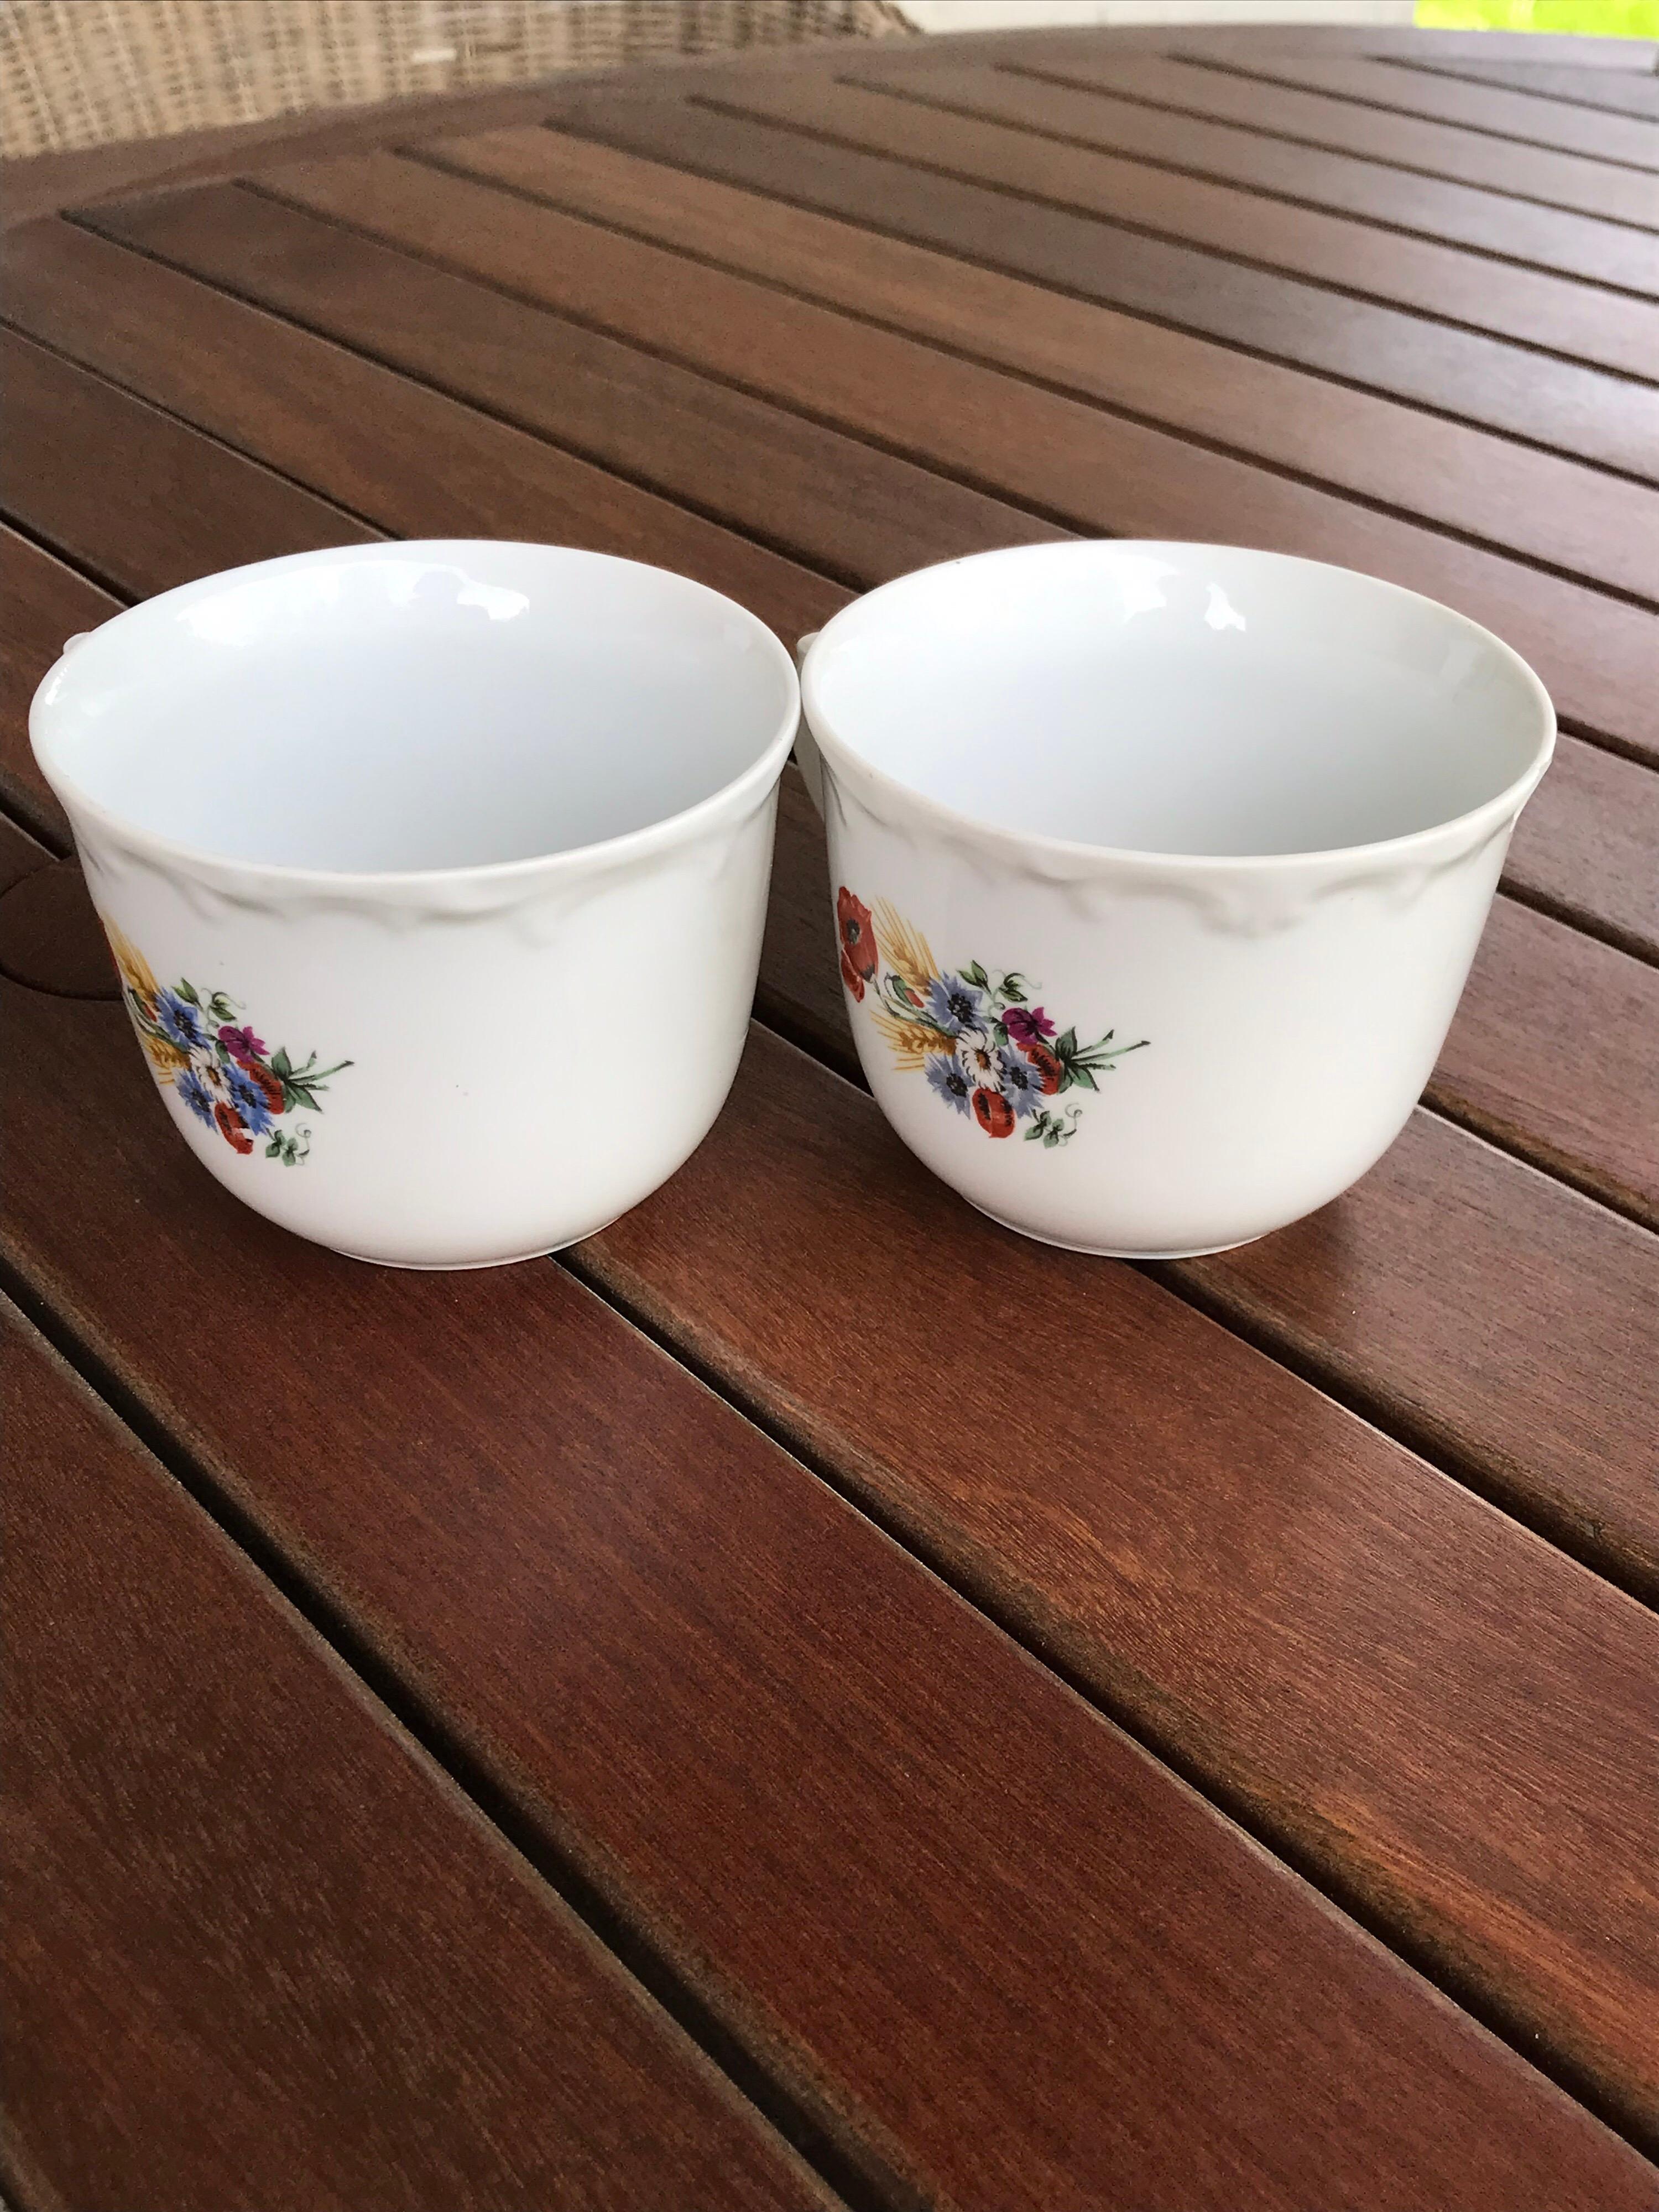 Vintage pair of fine porcelain Kahla tea cups with multi-color floral design - made in GDR
this is a beautiful pair of Kahla floral designed tea cups. The tea cups are very delicate and extremely fine.